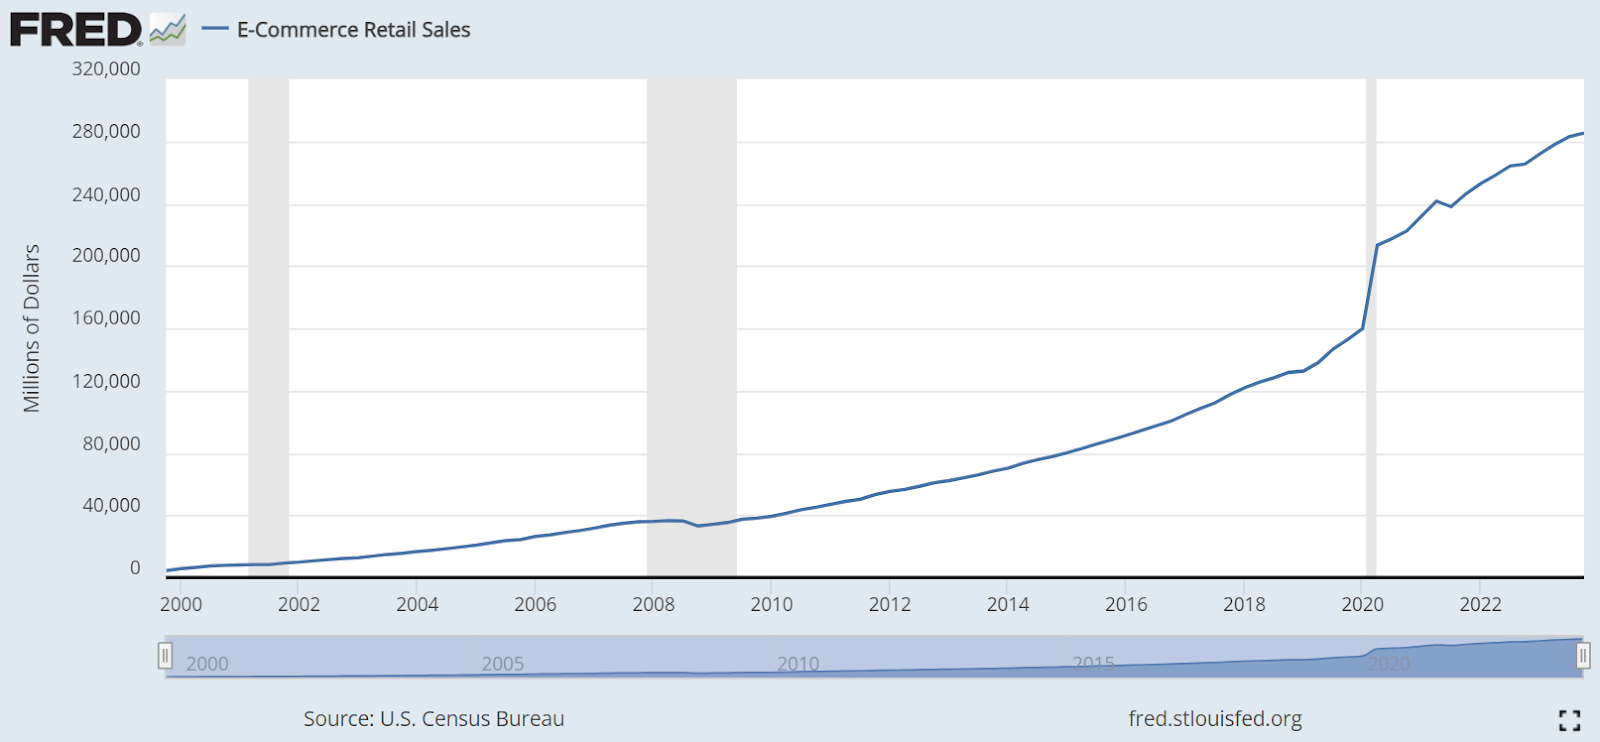 Line graph showing the growth of e-commerce retail sales from 2000 to 2022. 